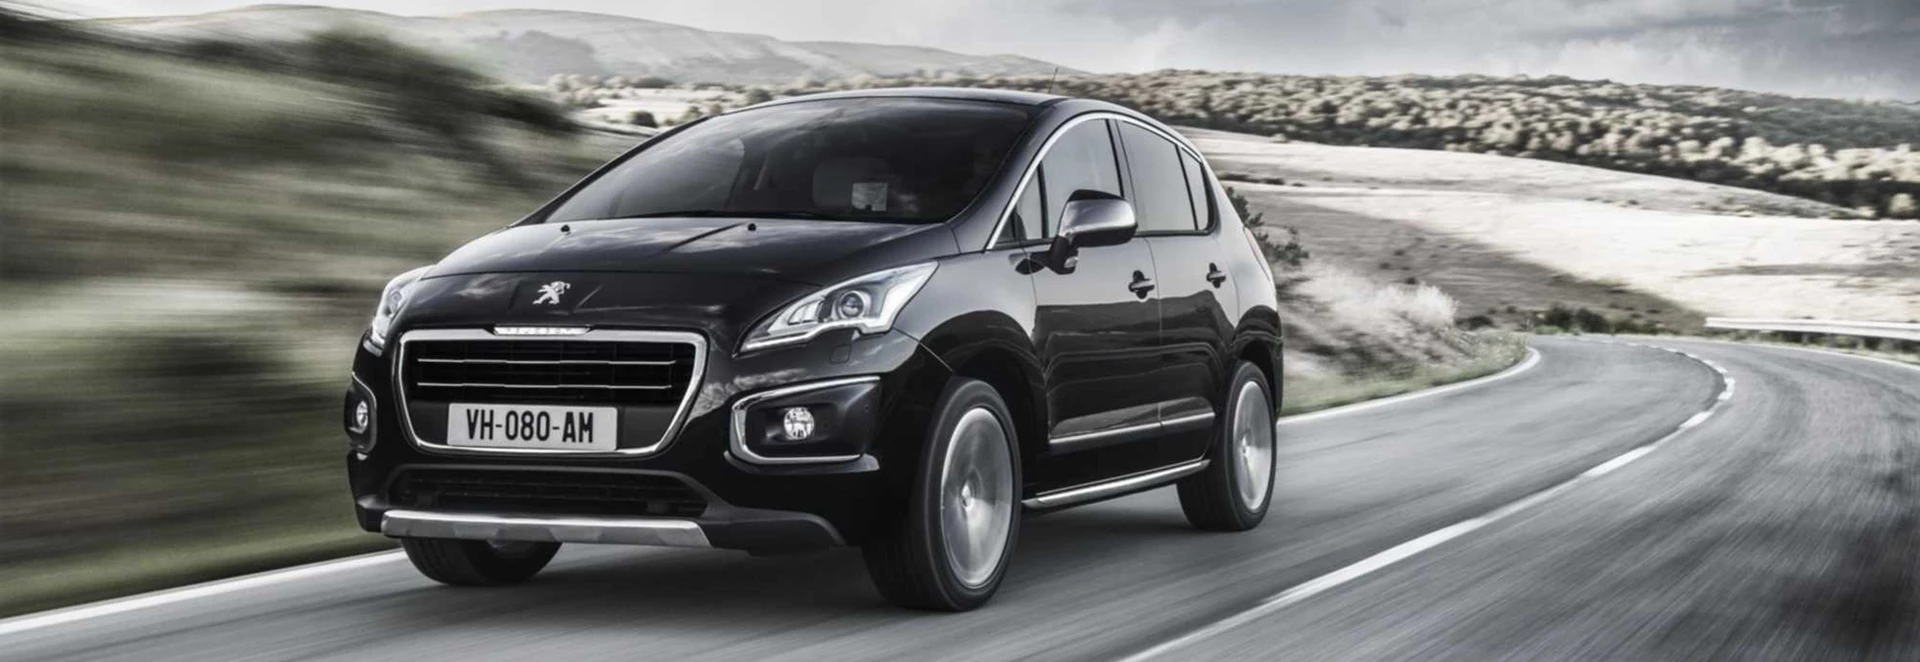 Peugeot 3008 crossover review 